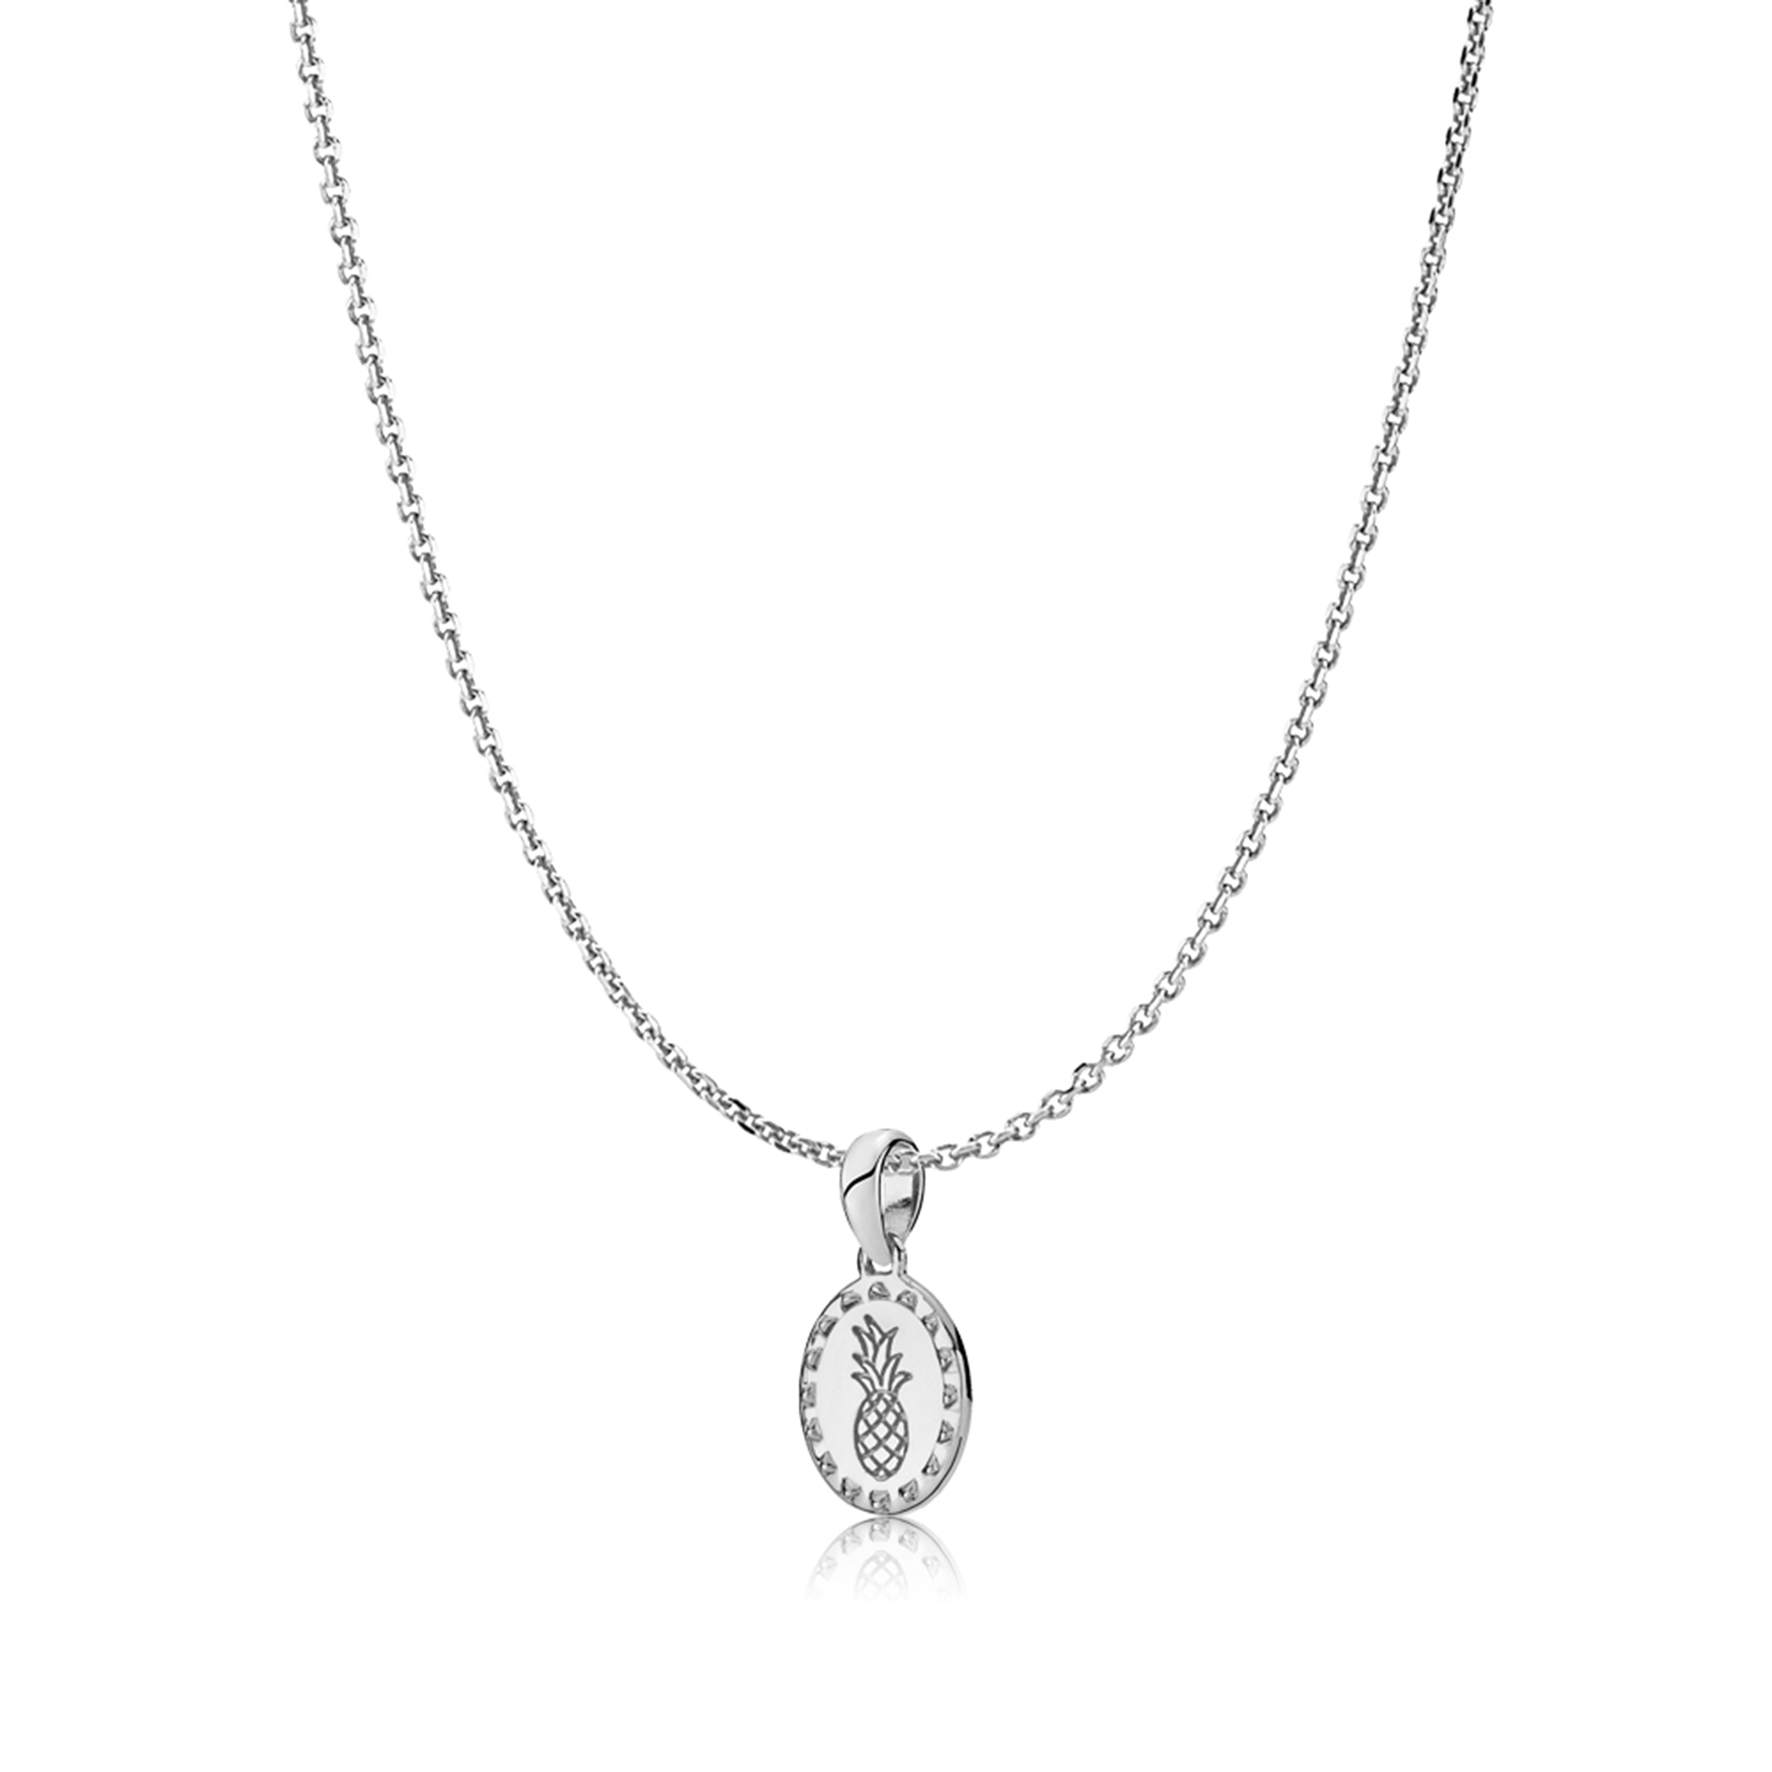 Anna By Sistie Round Pendant Necklace from Sistie in Silver Sterling 925